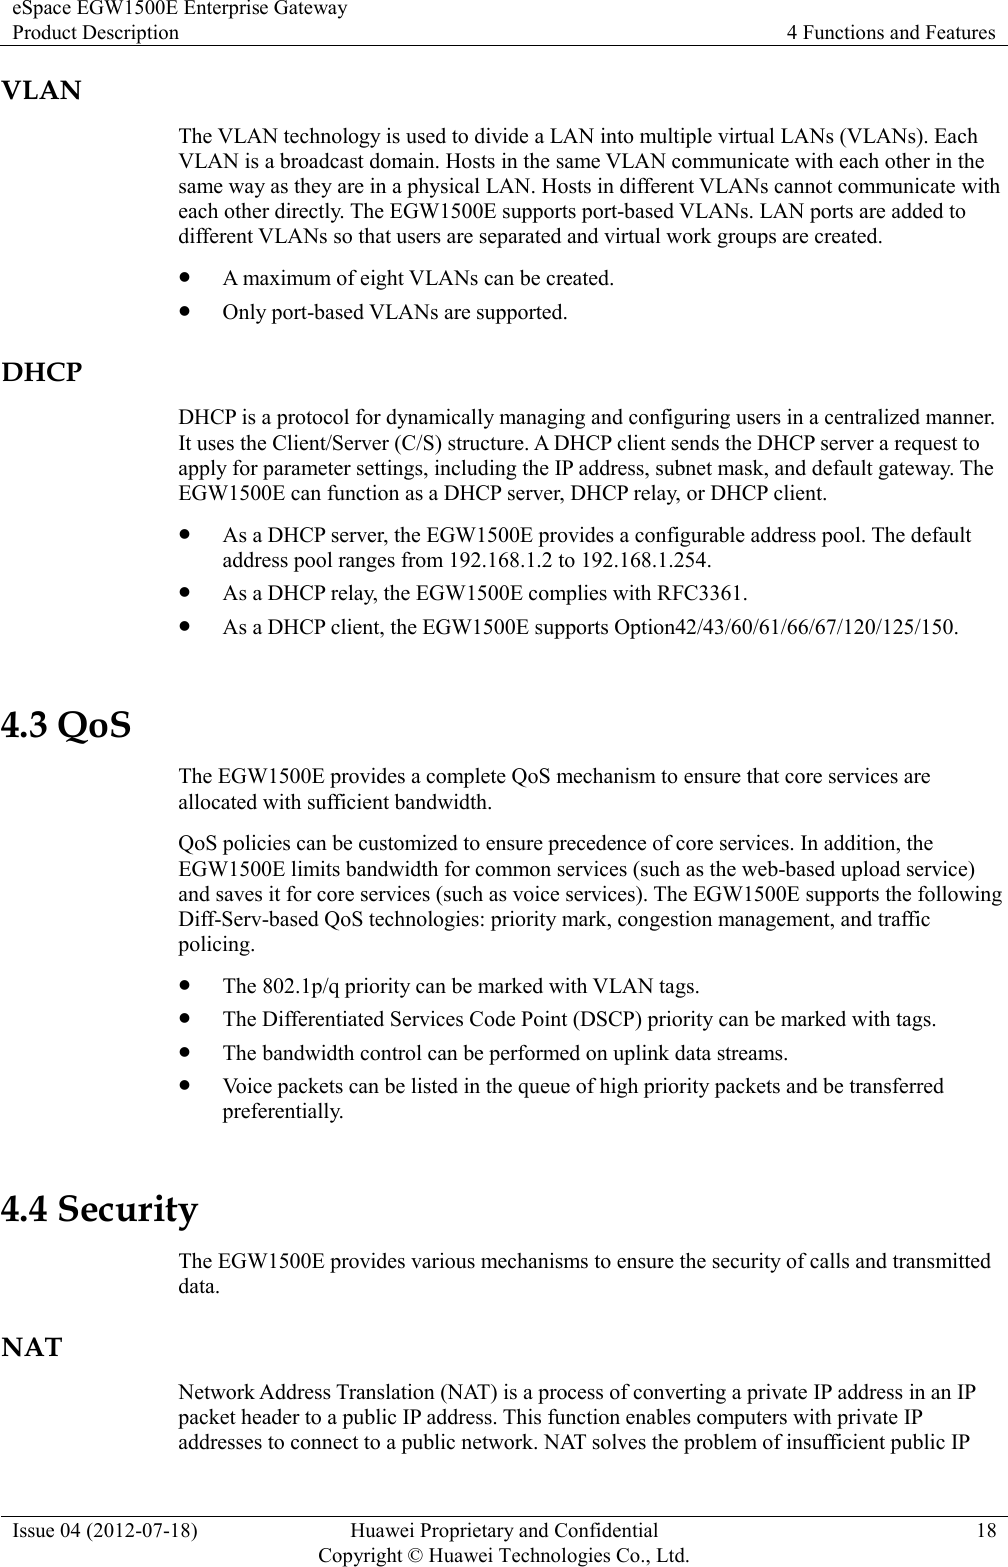 eSpace EGW1500E Enterprise Gateway Product Description 4 Functions and Features  Issue 04 (2012-07-18) Huawei Proprietary and Confidential                                     Copyright © Huawei Technologies Co., Ltd. 18  VLAN The VLAN technology is used to divide a LAN into multiple virtual LANs (VLANs). Each VLAN is a broadcast domain. Hosts in the same VLAN communicate with each other in the same way as they are in a physical LAN. Hosts in different VLANs cannot communicate with each other directly. The EGW1500E supports port-based VLANs. LAN ports are added to different VLANs so that users are separated and virtual work groups are created.  A maximum of eight VLANs can be created.  Only port-based VLANs are supported. DHCP DHCP is a protocol for dynamically managing and configuring users in a centralized manner. It uses the Client/Server (C/S) structure. A DHCP client sends the DHCP server a request to apply for parameter settings, including the IP address, subnet mask, and default gateway. The EGW1500E can function as a DHCP server, DHCP relay, or DHCP client.  As a DHCP server, the EGW1500E provides a configurable address pool. The default address pool ranges from 192.168.1.2 to 192.168.1.254.  As a DHCP relay, the EGW1500E complies with RFC3361.  As a DHCP client, the EGW1500E supports Option42/43/60/61/66/67/120/125/150. 4.3 QoS The EGW1500E provides a complete QoS mechanism to ensure that core services are allocated with sufficient bandwidth. QoS policies can be customized to ensure precedence of core services. In addition, the EGW1500E limits bandwidth for common services (such as the web-based upload service) and saves it for core services (such as voice services). The EGW1500E supports the following Diff-Serv-based QoS technologies: priority mark, congestion management, and traffic policing.  The 802.1p/q priority can be marked with VLAN tags.  The Differentiated Services Code Point (DSCP) priority can be marked with tags.  The bandwidth control can be performed on uplink data streams.  Voice packets can be listed in the queue of high priority packets and be transferred preferentially. 4.4 Security The EGW1500E provides various mechanisms to ensure the security of calls and transmitted data. NAT Network Address Translation (NAT) is a process of converting a private IP address in an IP packet header to a public IP address. This function enables computers with private IP addresses to connect to a public network. NAT solves the problem of insufficient public IP 